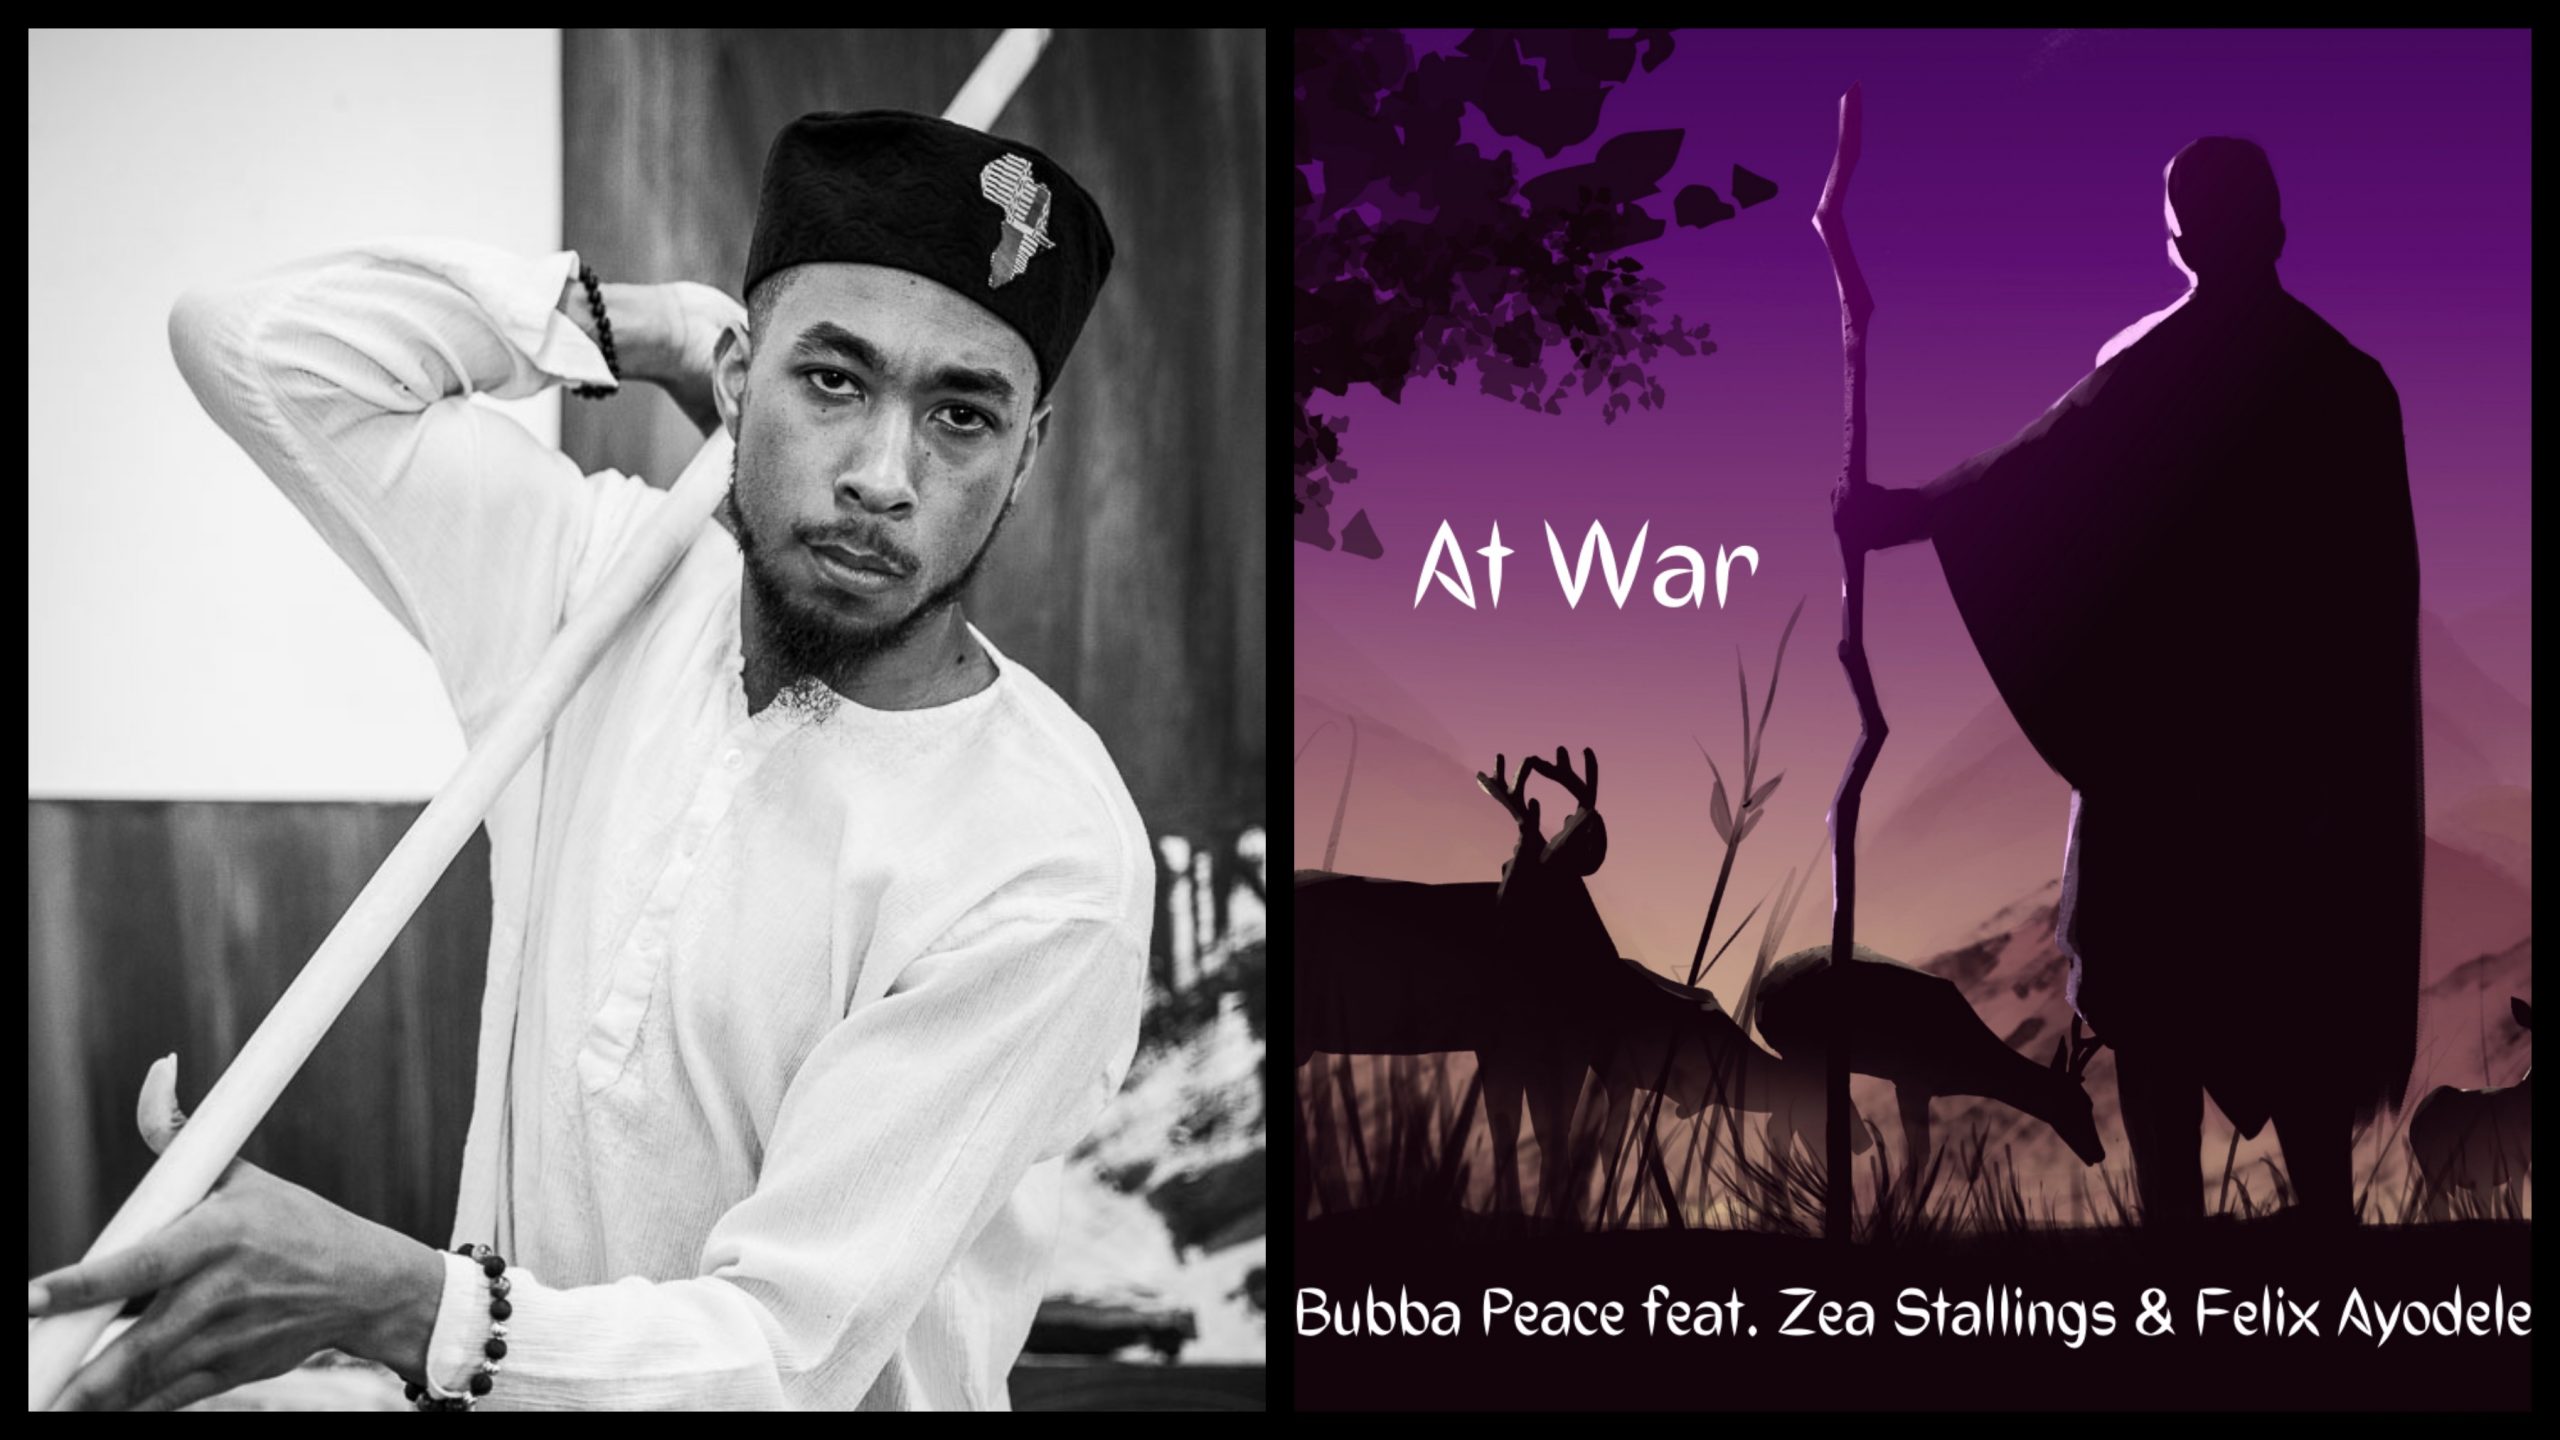 ‘AT WAR’ BY BUBBA PEACE FEATURES ZEA STALLINGS WHO GIVES A CAMPFIRE MELODY WITH FELIX AYODELE PAINTING TEARS THROUGH PIANO IN THE BACKGROUND